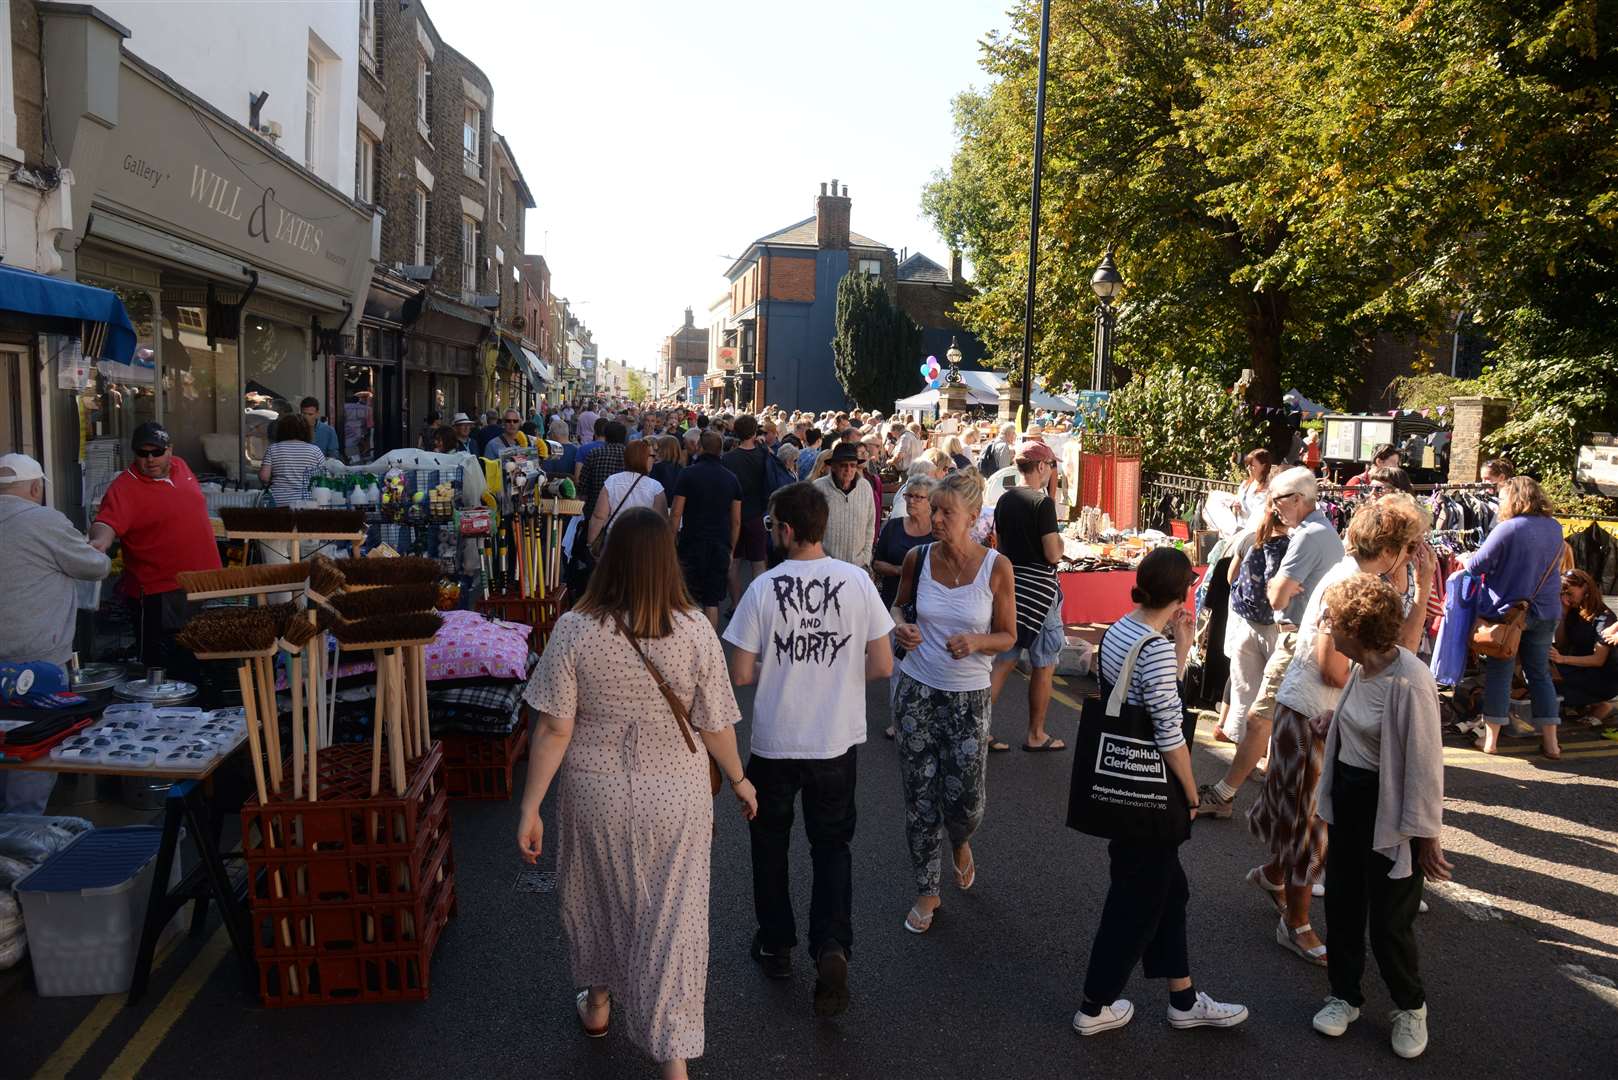 The busy High Street in Deal during a previous braderie